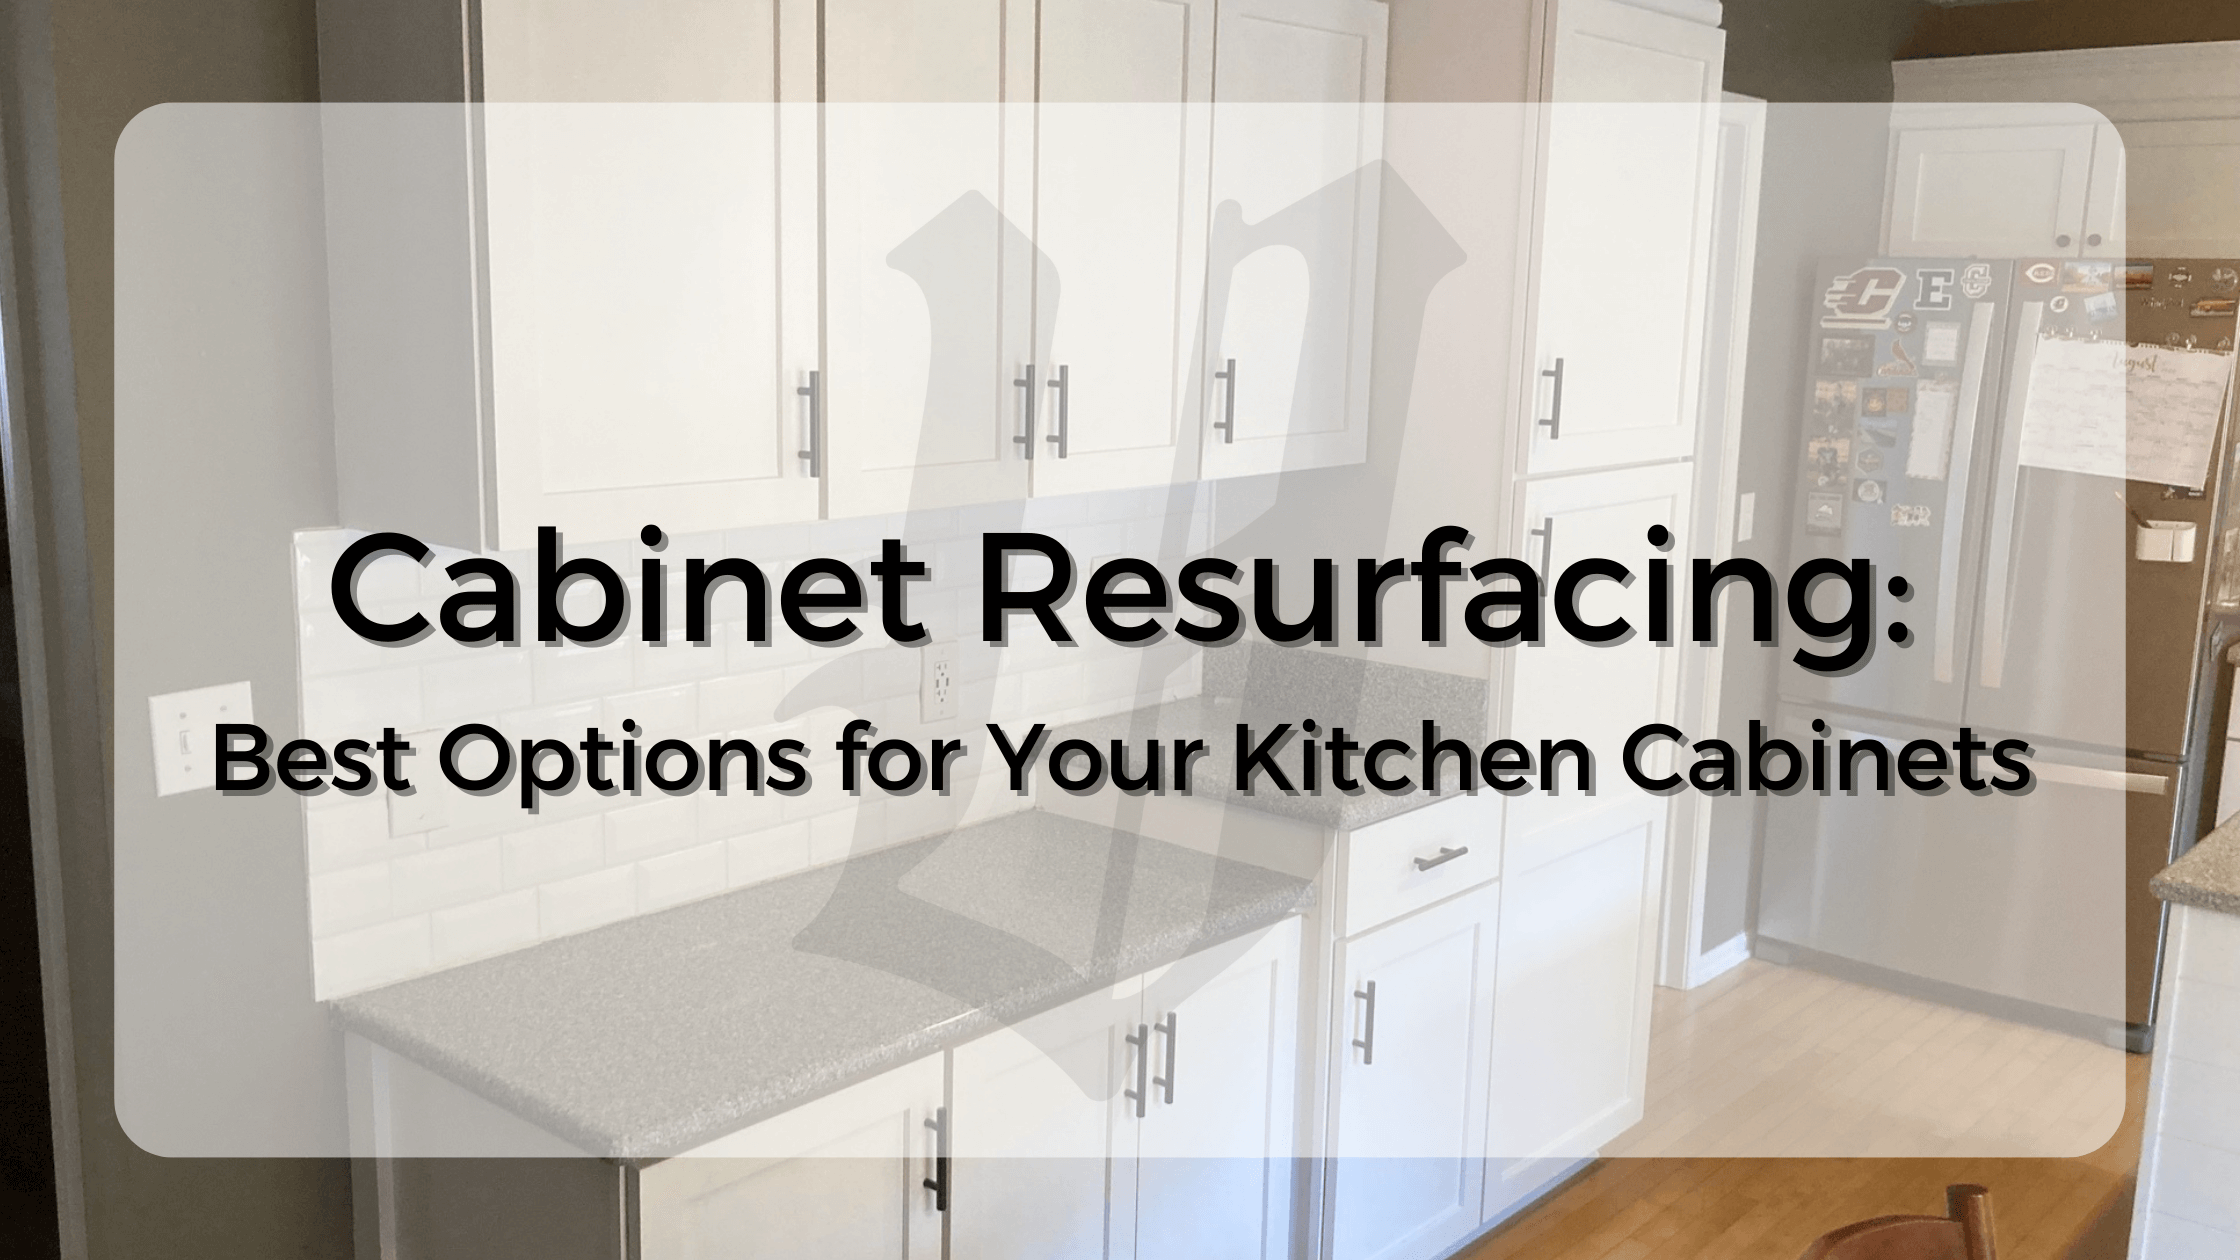 Cabinet resurfacing: best options for your kitchen cabinets